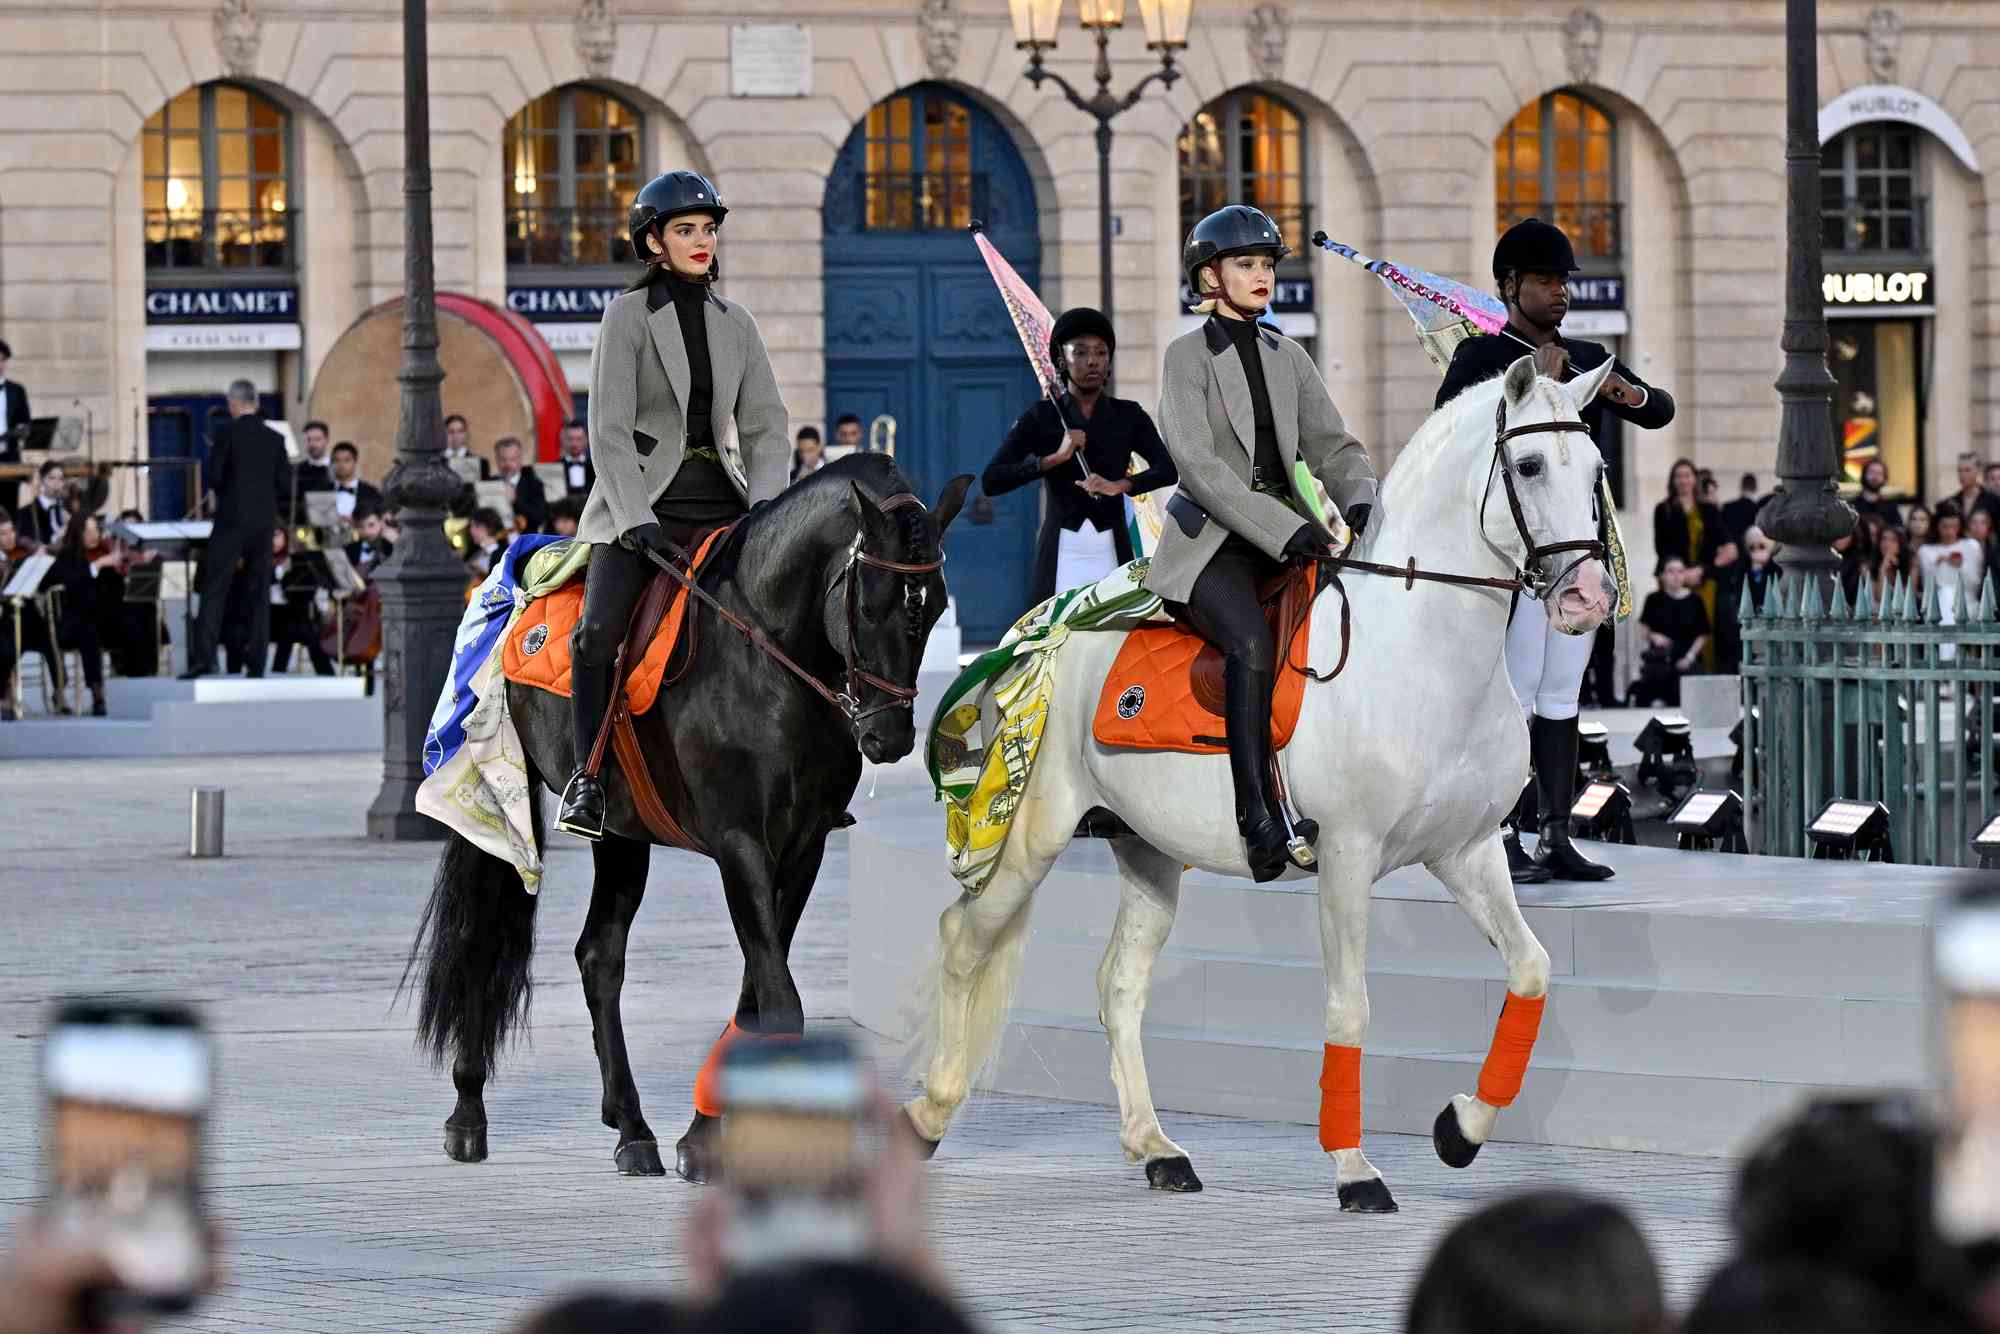 Kendall Jenner and Gigi Hadid ride horses on the runway during Vogue World: Paris at Place Vendome on June 23, 2024 in Paris, France.